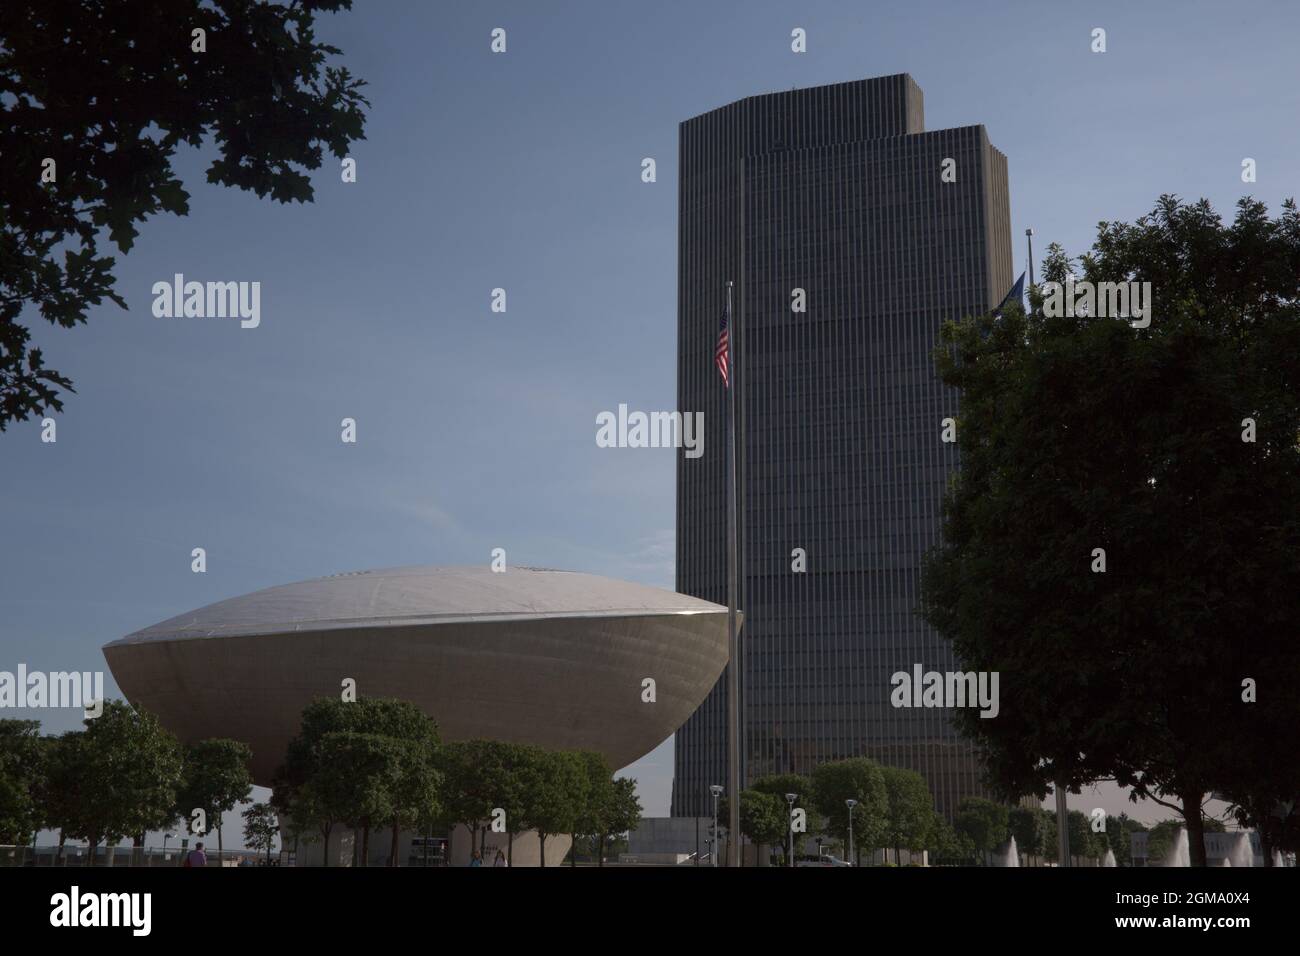 Views of the Nelson Rockefeller Empire State Plaza in Albany, New York.  The Egg, designed by Harrison and Abramovitz, is an example of modern architecture. Stock Photo